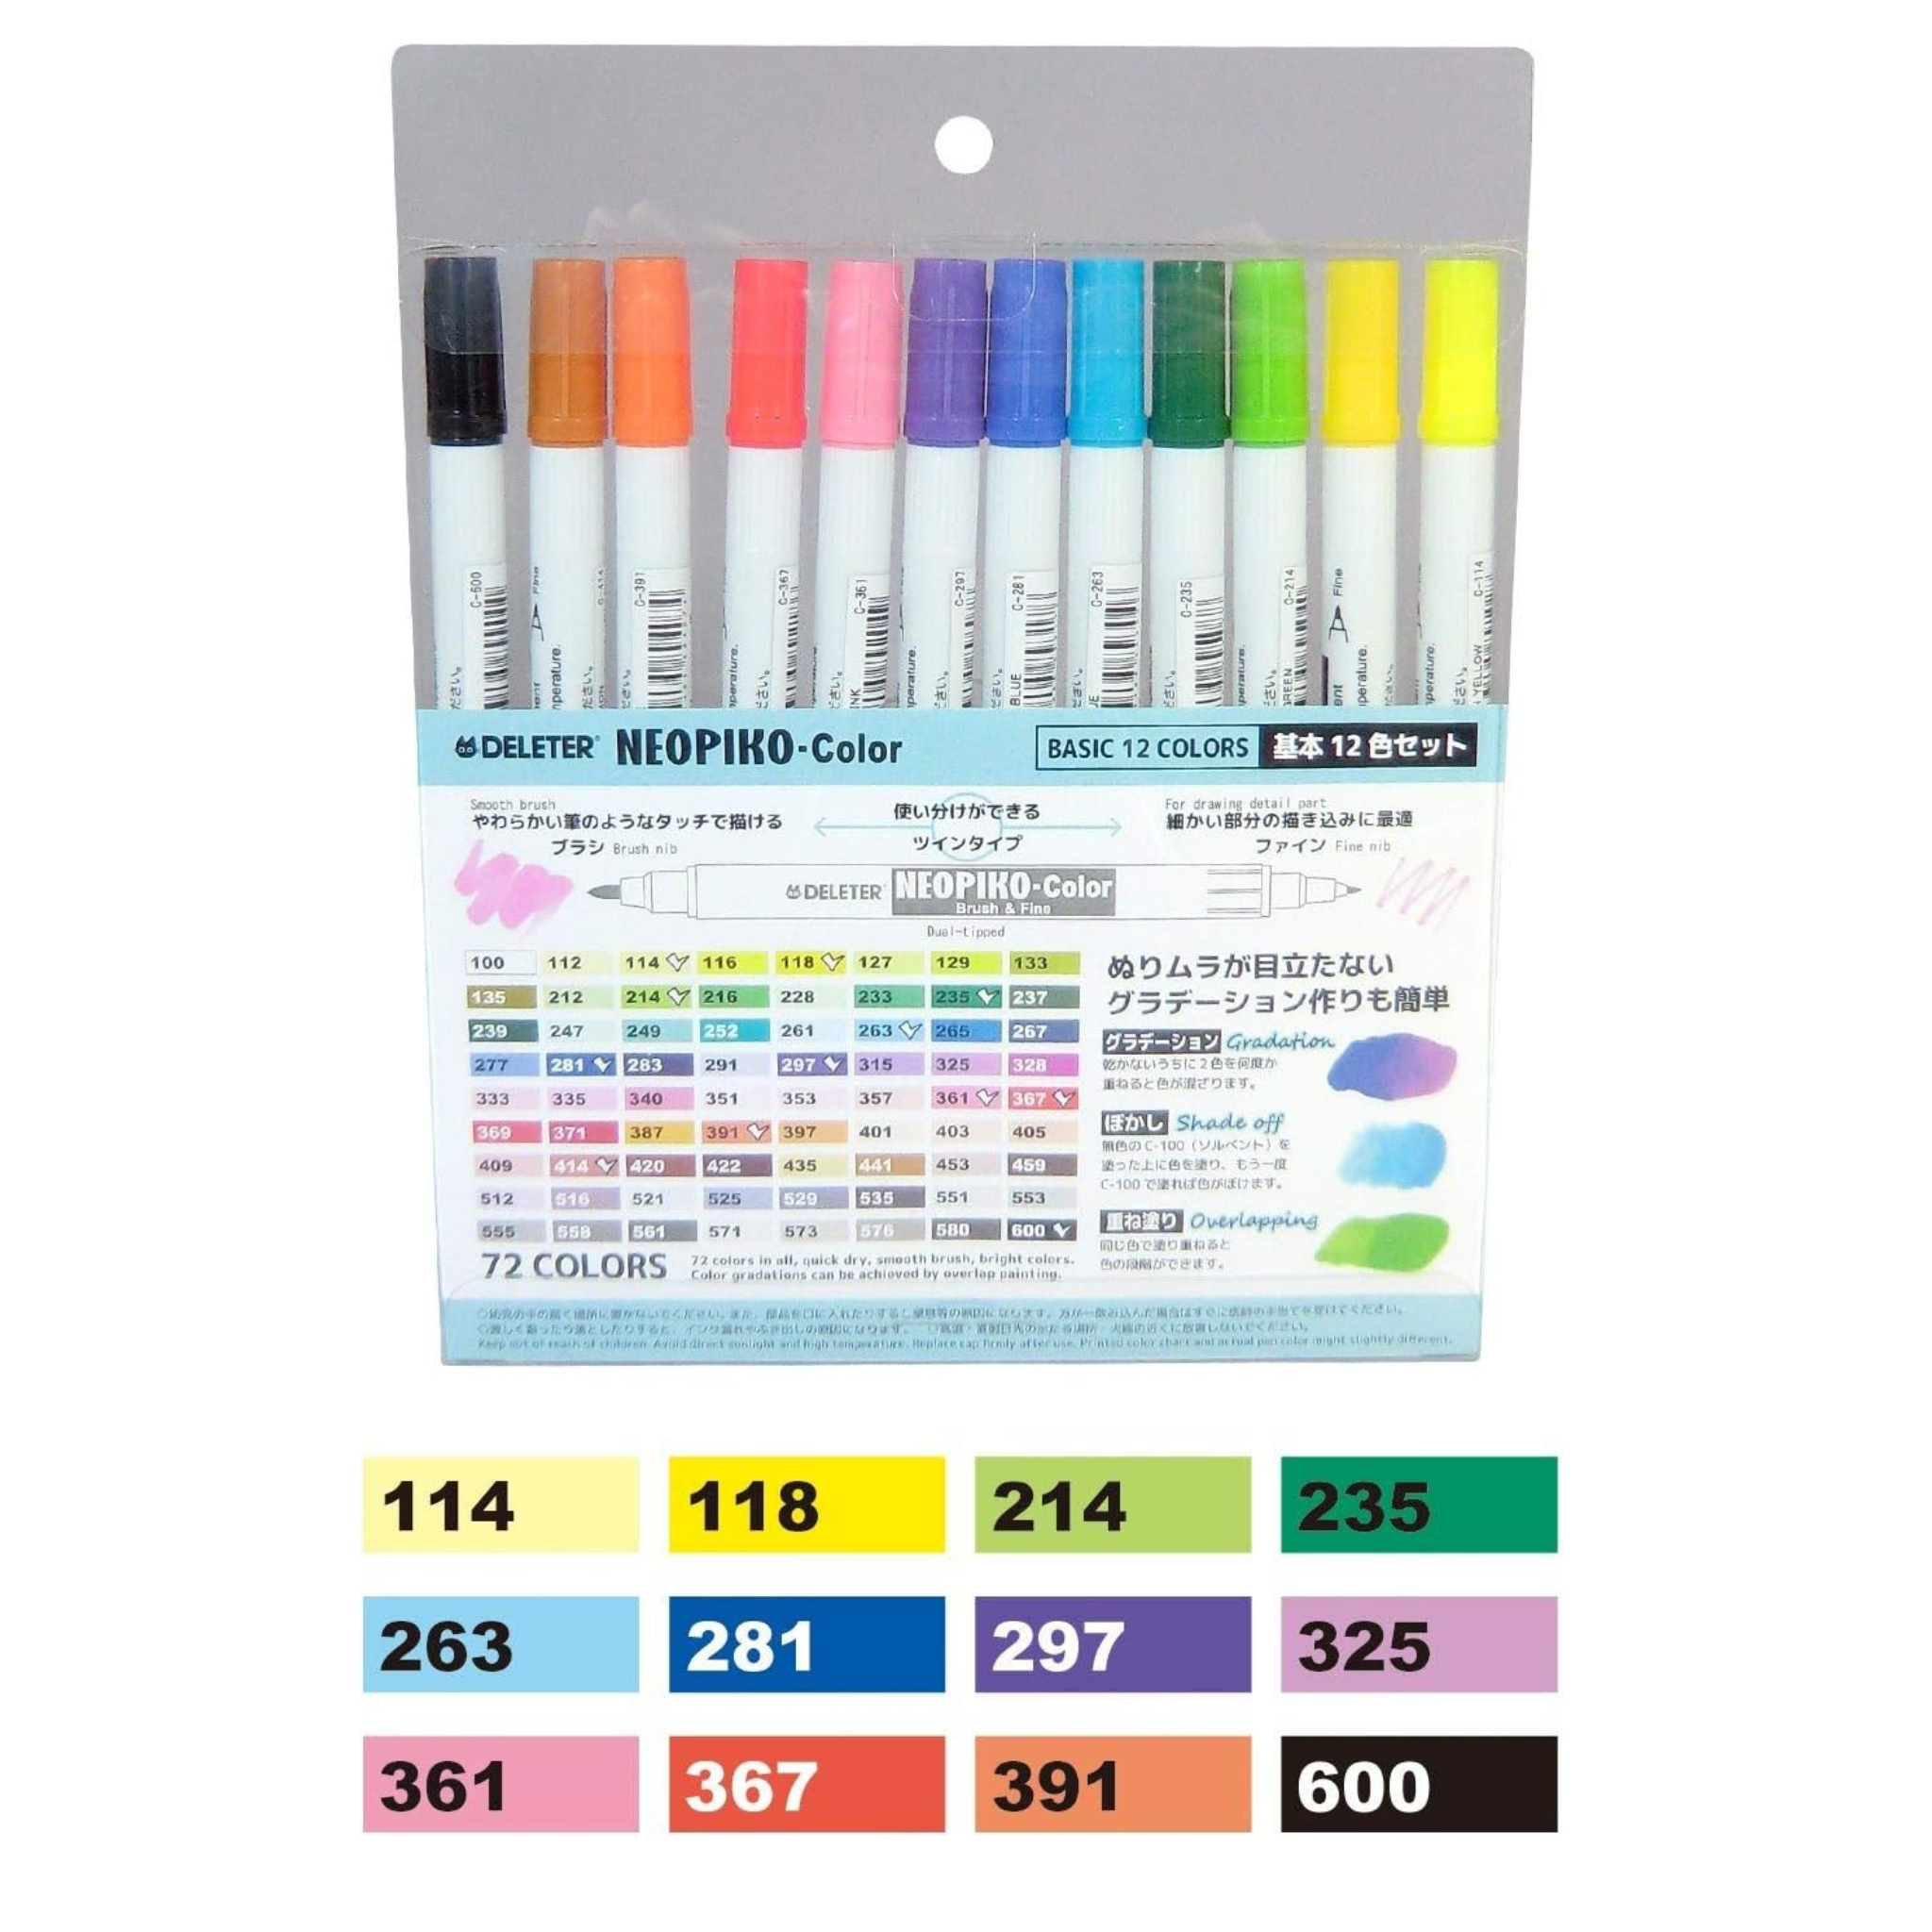 DELETER Neopiko Color, Basic 12 colors set